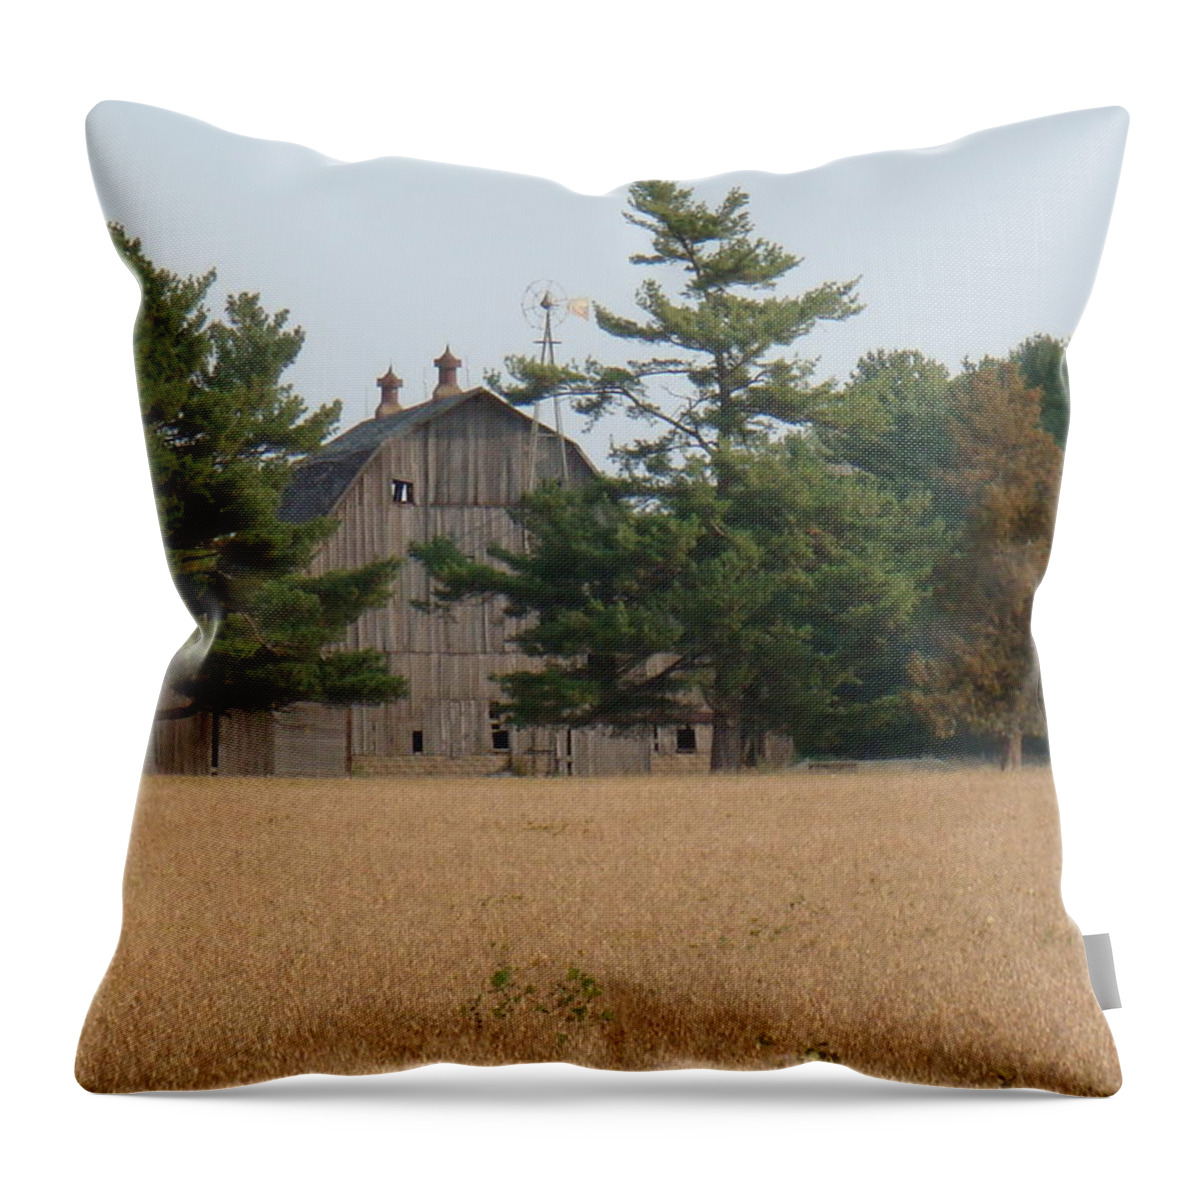 Barn Throw Pillow featuring the photograph The Farm by Bonfire Photography